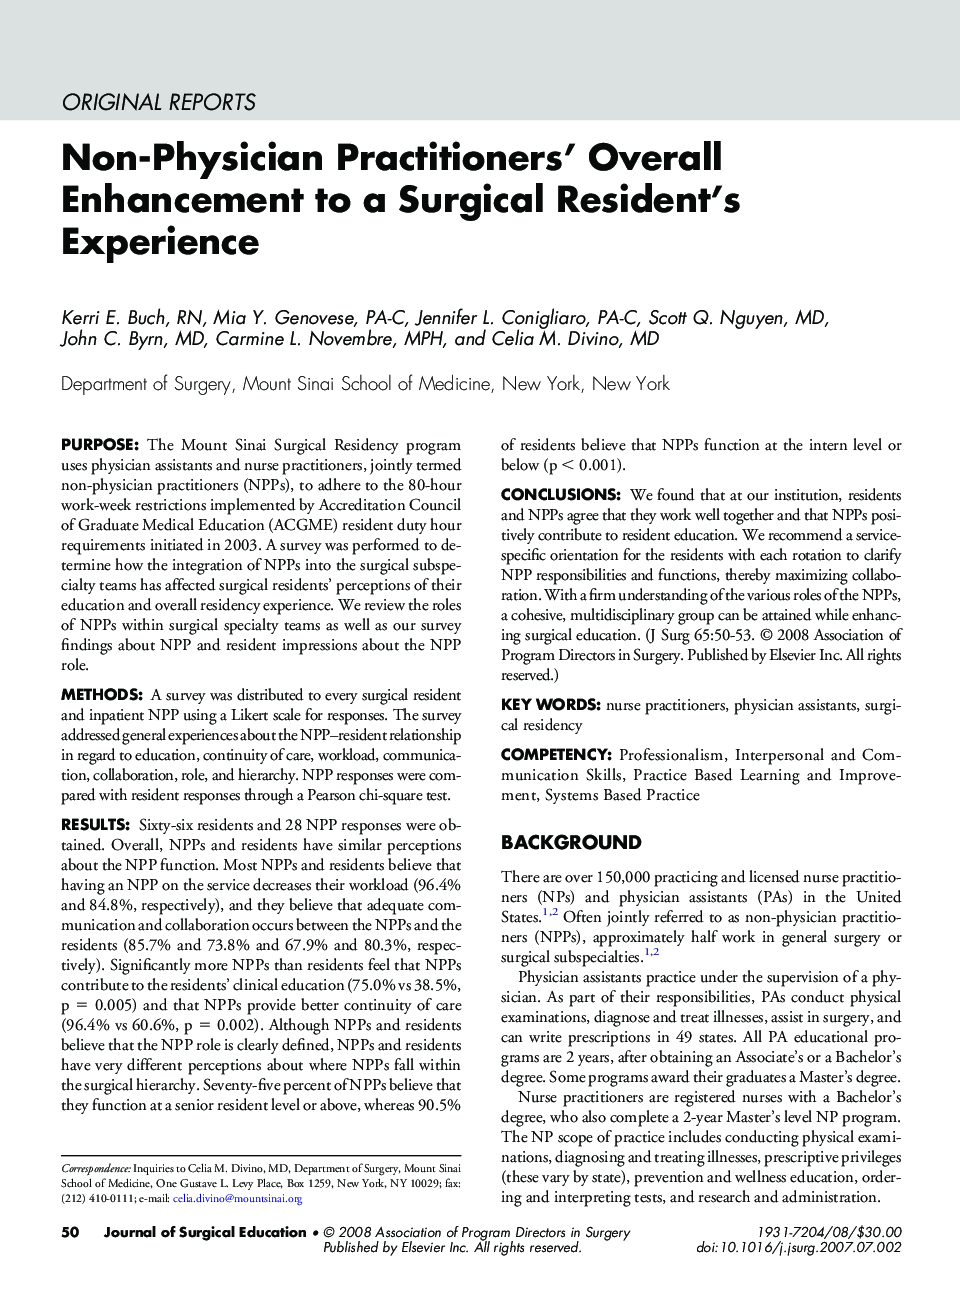 Non-Physician Practitioners’ Overall Enhancement to a Surgical Resident’s Experience